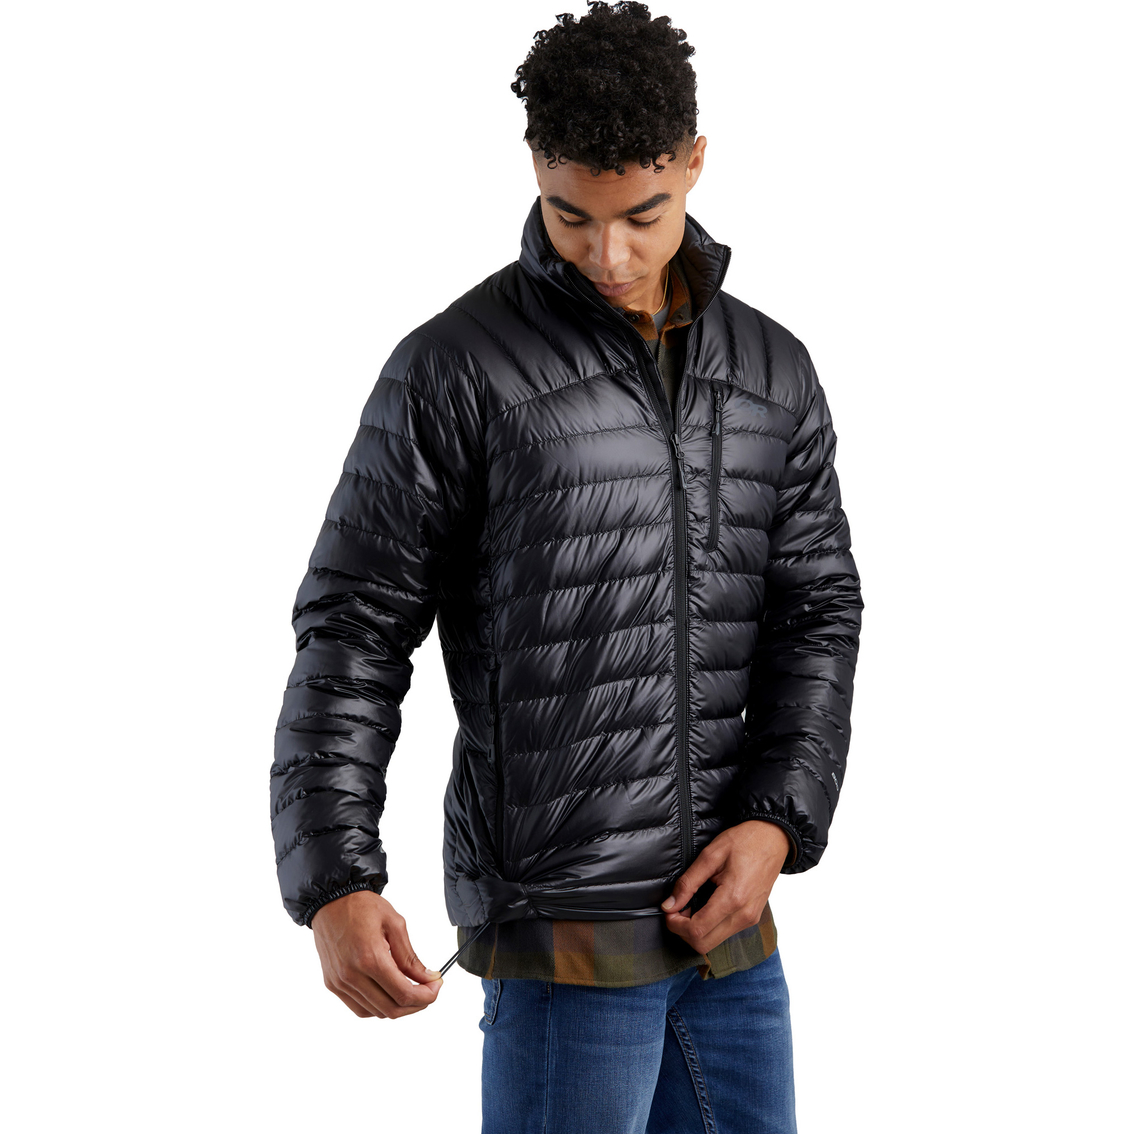 Outdoor Research Helium Down Jacket | Jackets | Clothing & Accessories ...